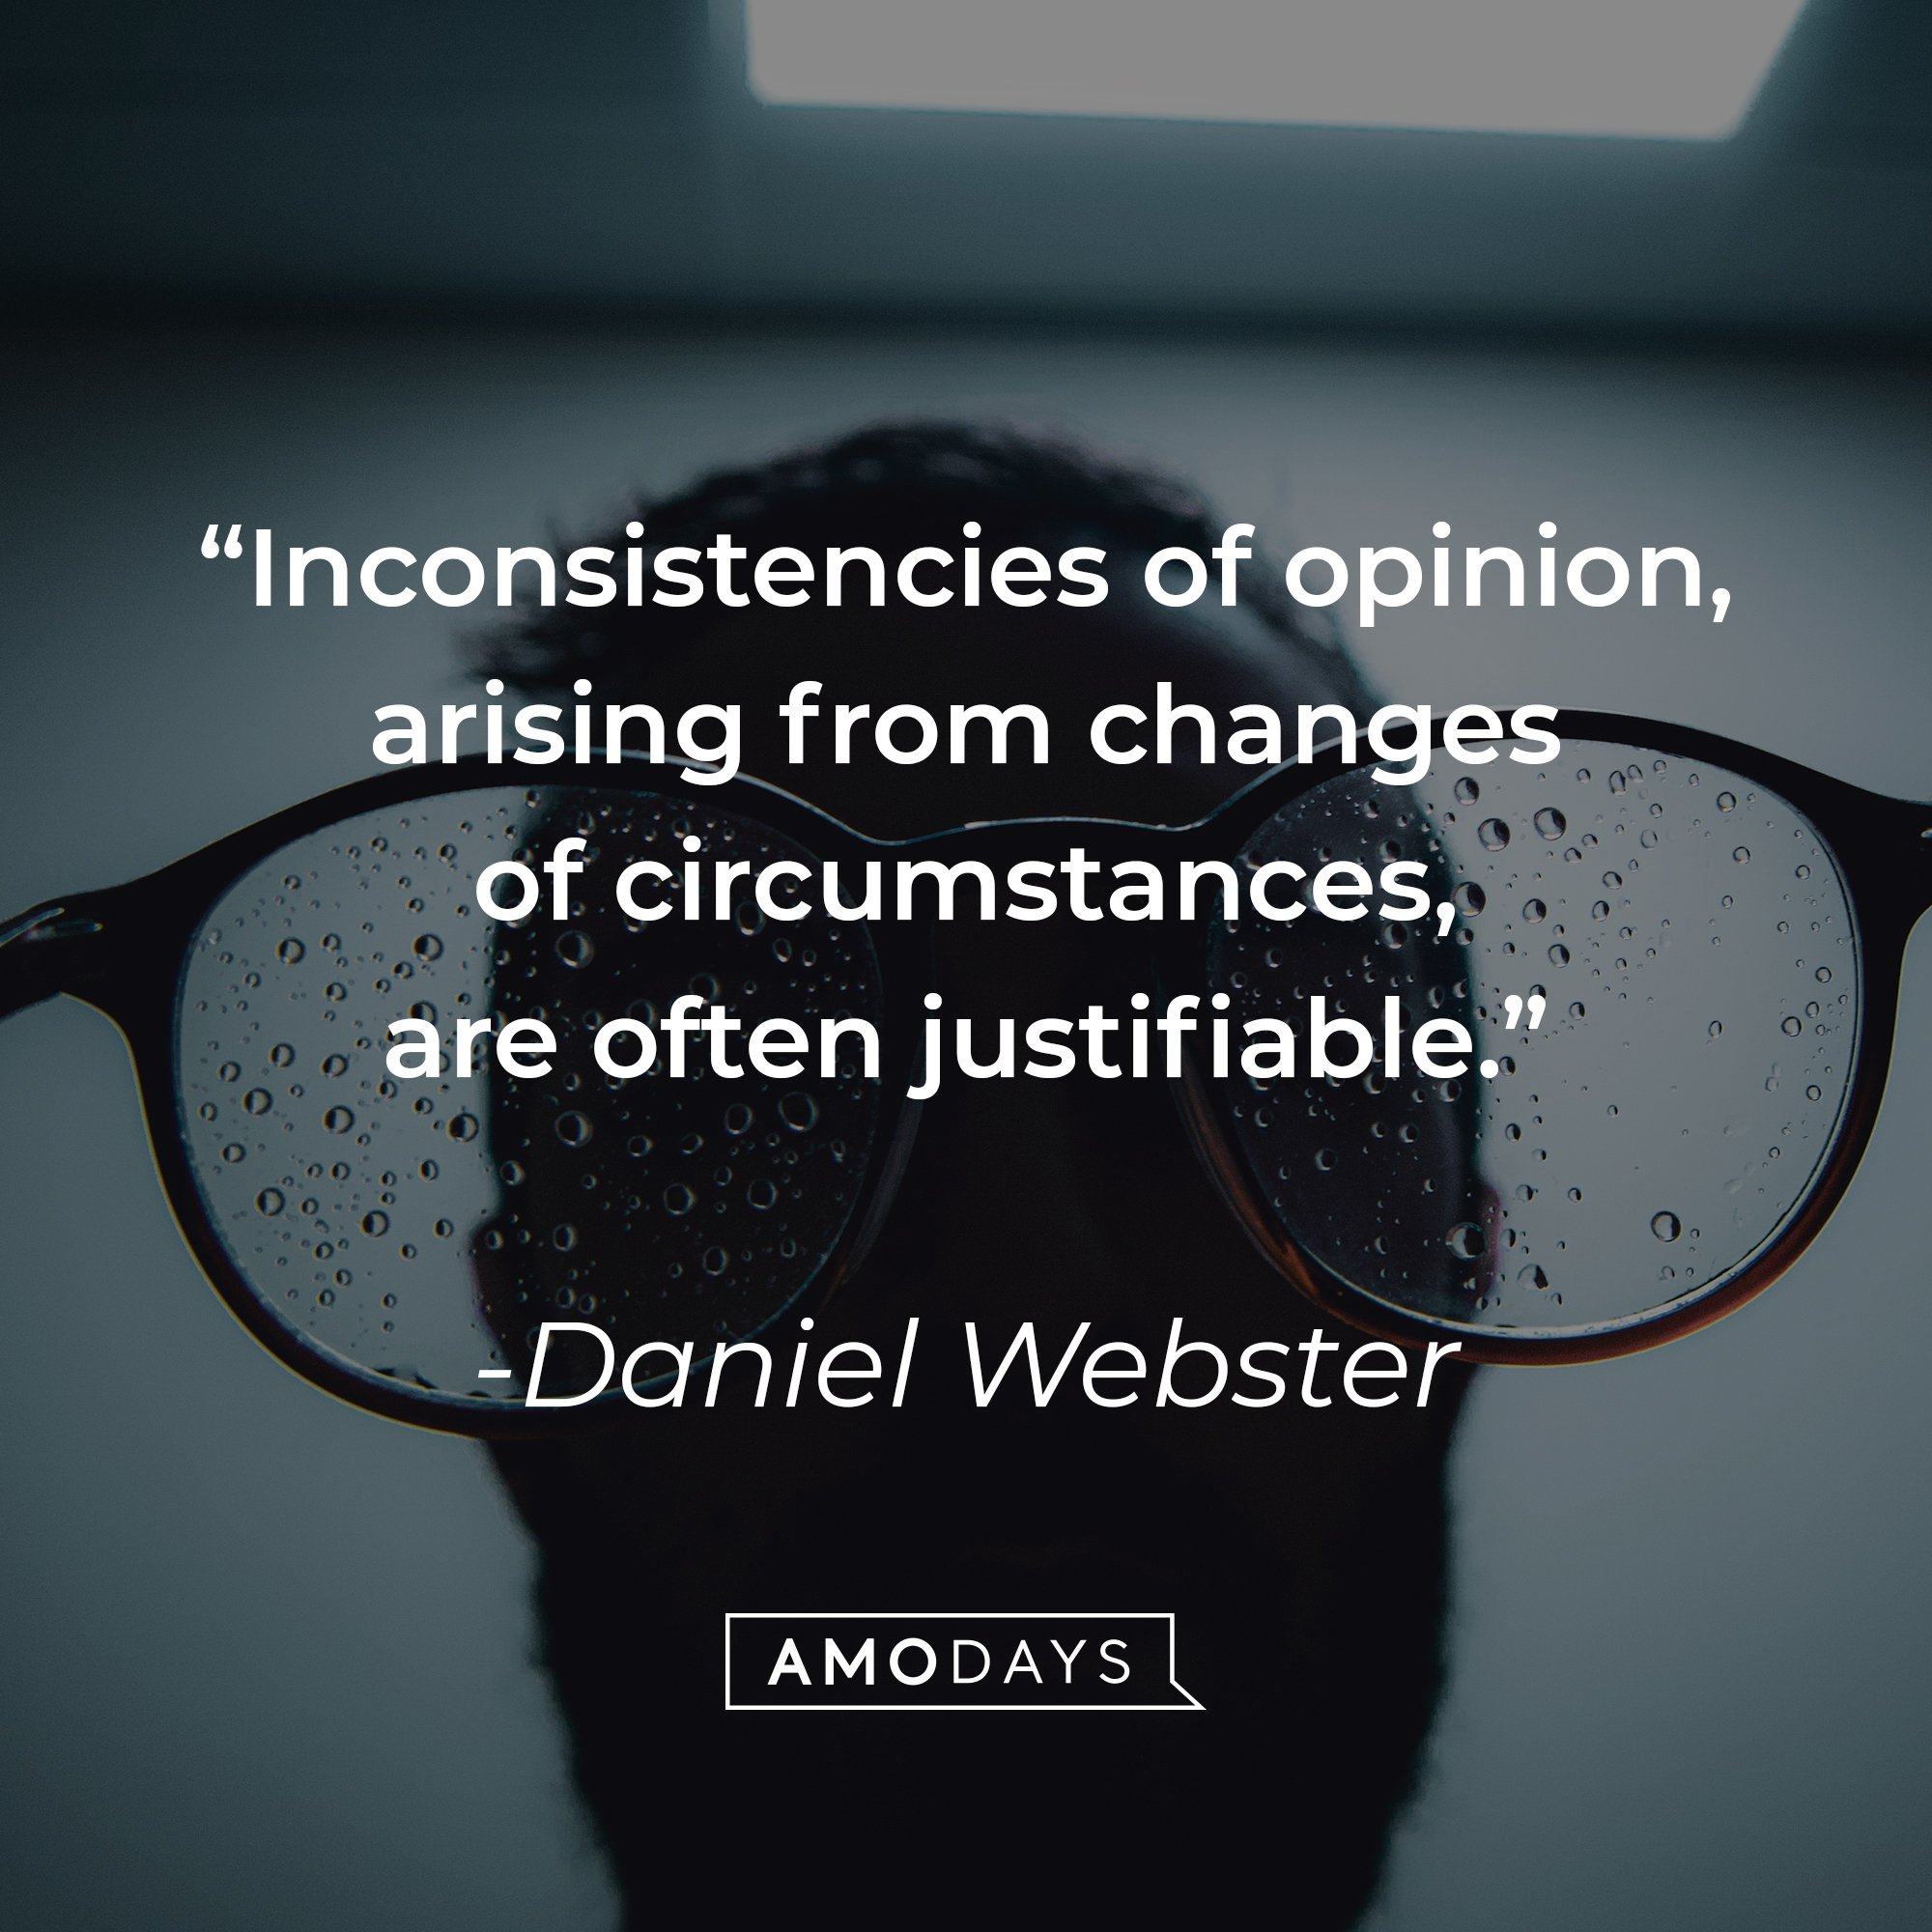 Daniel Webster's quote: "Inconsistencies of opinion, arising from changes of circumstances, are often justifiable." | Image: AmoDays